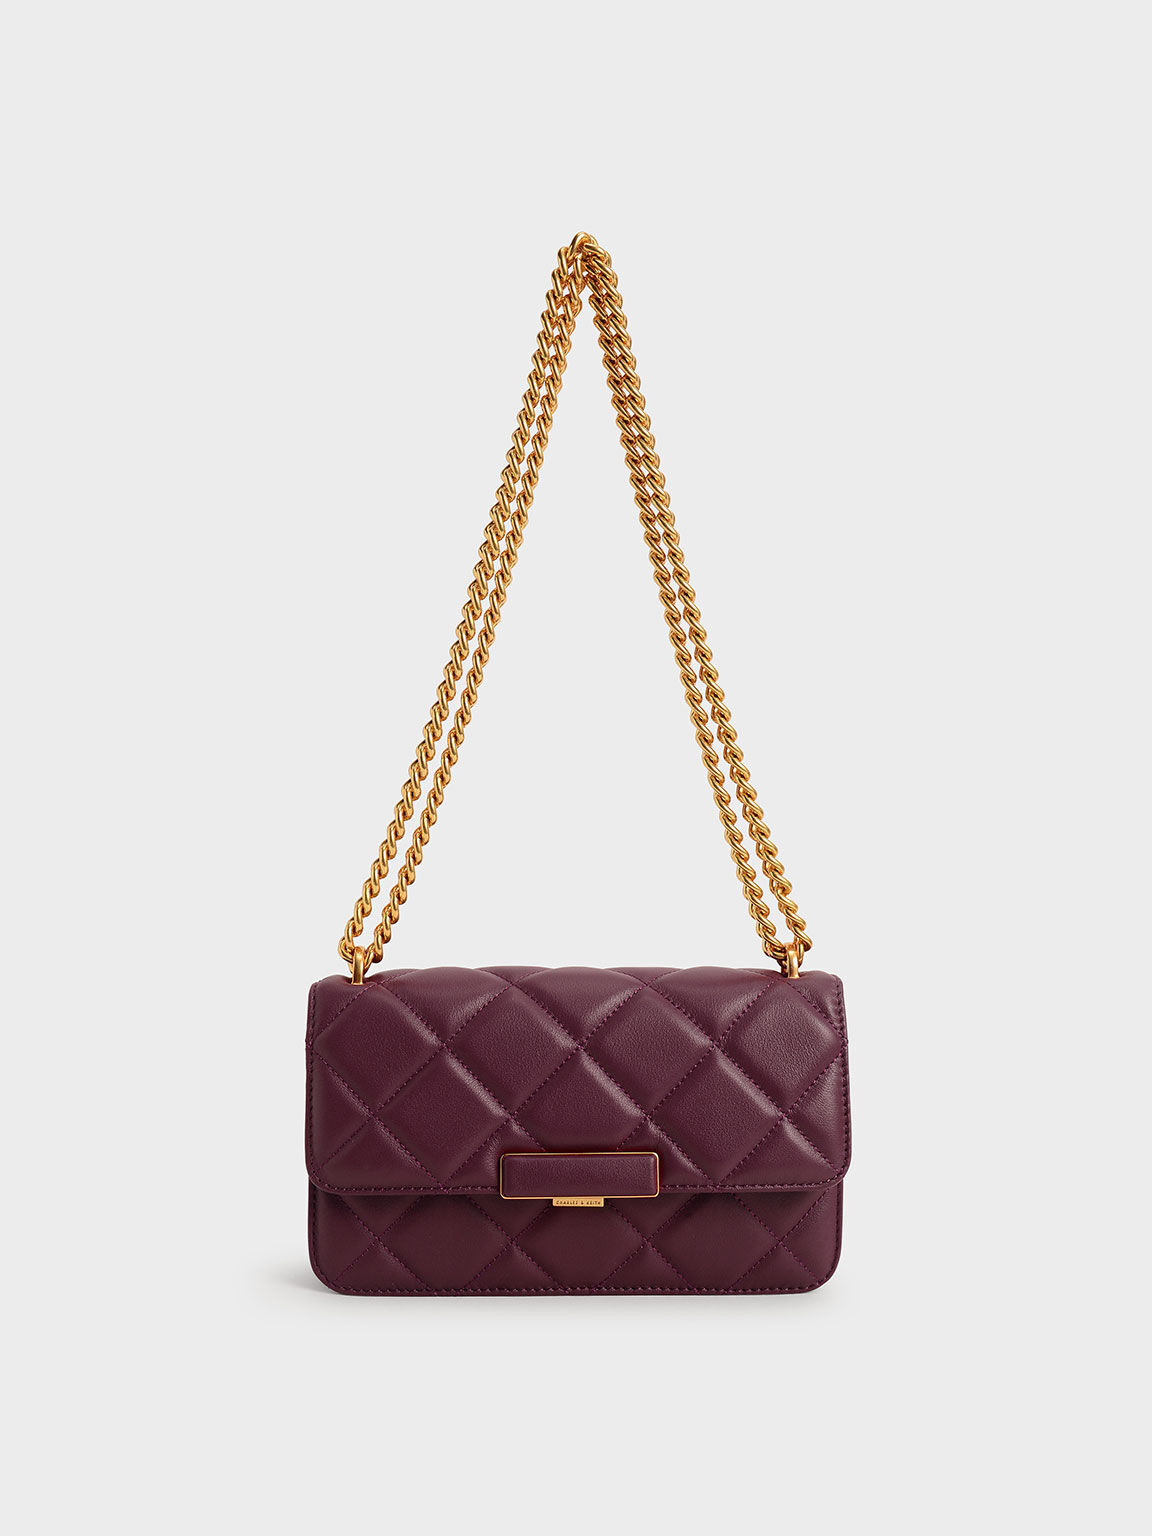 Quilted Leather Chain-Handle Bag, Burgundy, hi-res